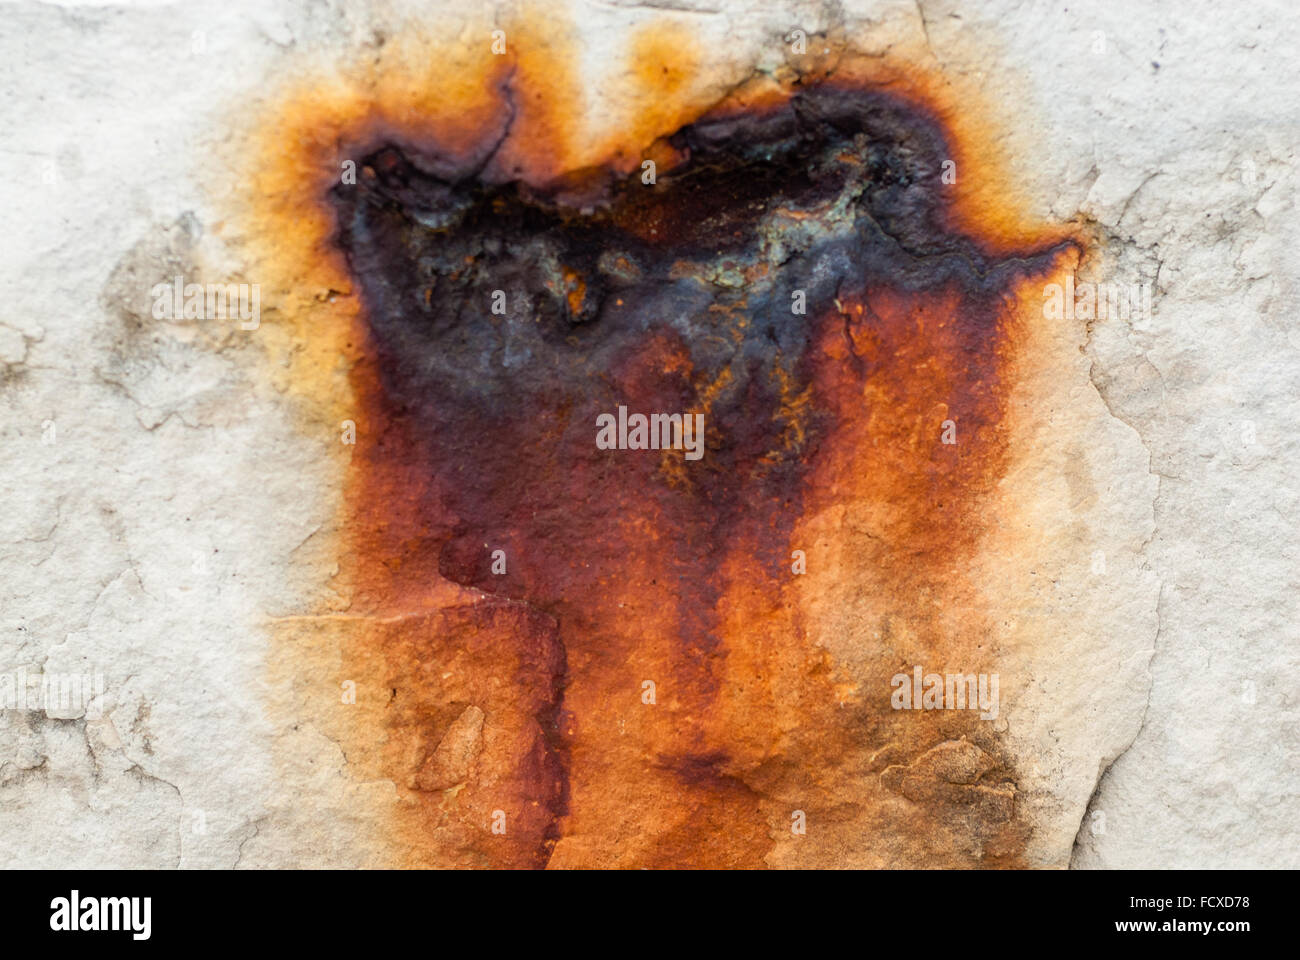 Rusted red burn scar on white stone wall, cracked and dripping with orange fringe. Stock Photo